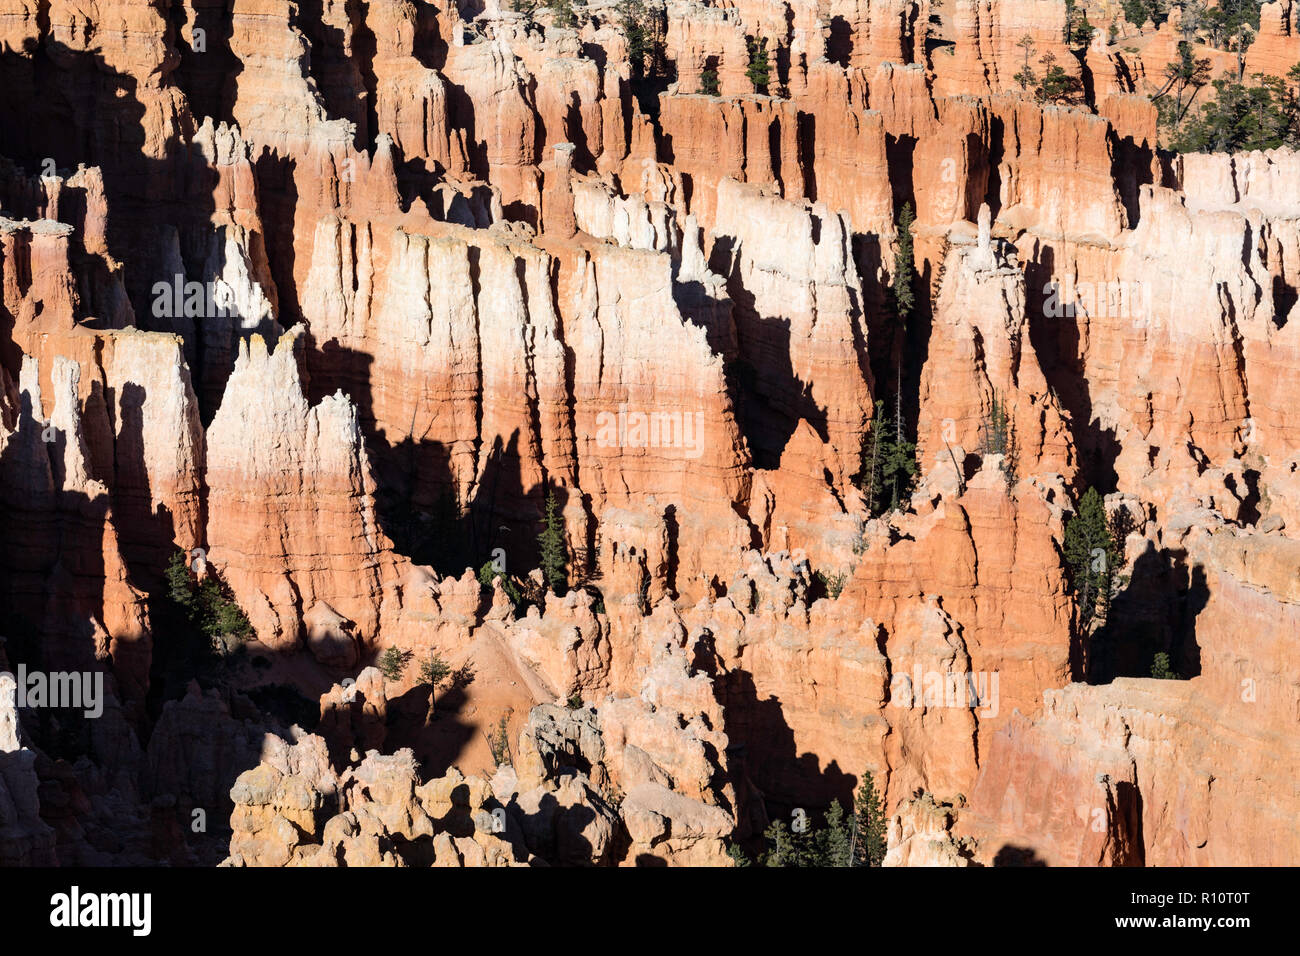 View of hoodoo formations from the Navajo Loop Trail in Bryce Canyon National Park, Utah, USA. Stock Photo